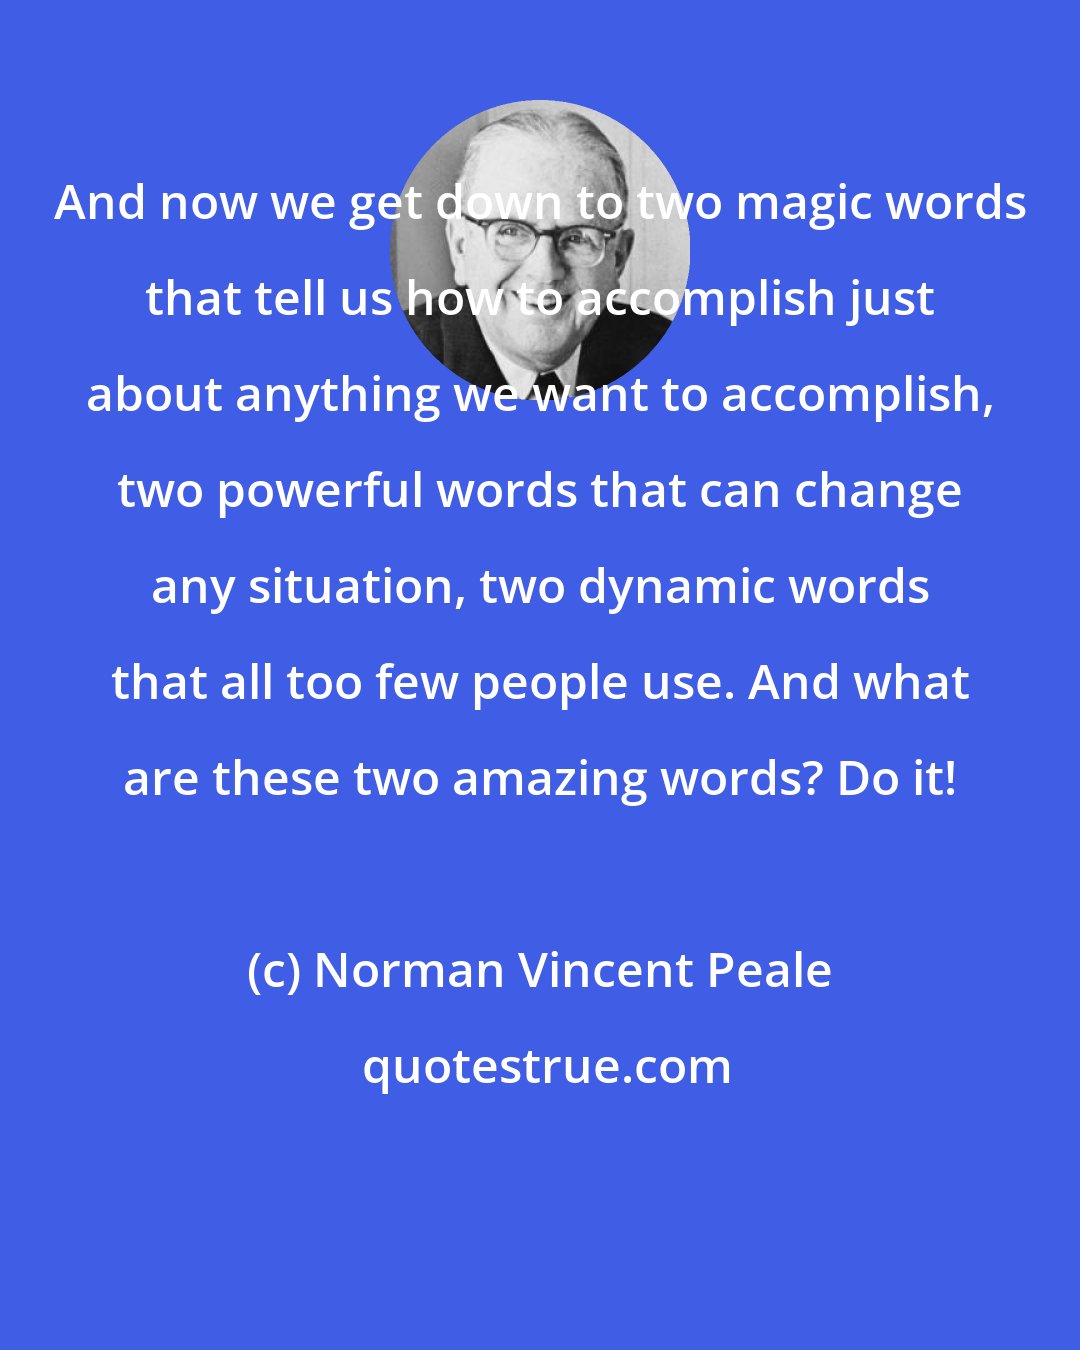 Norman Vincent Peale: And now we get down to two magic words that tell us how to accomplish just about anything we want to accomplish, two powerful words that can change any situation, two dynamic words that all too few people use. And what are these two amazing words? Do it!